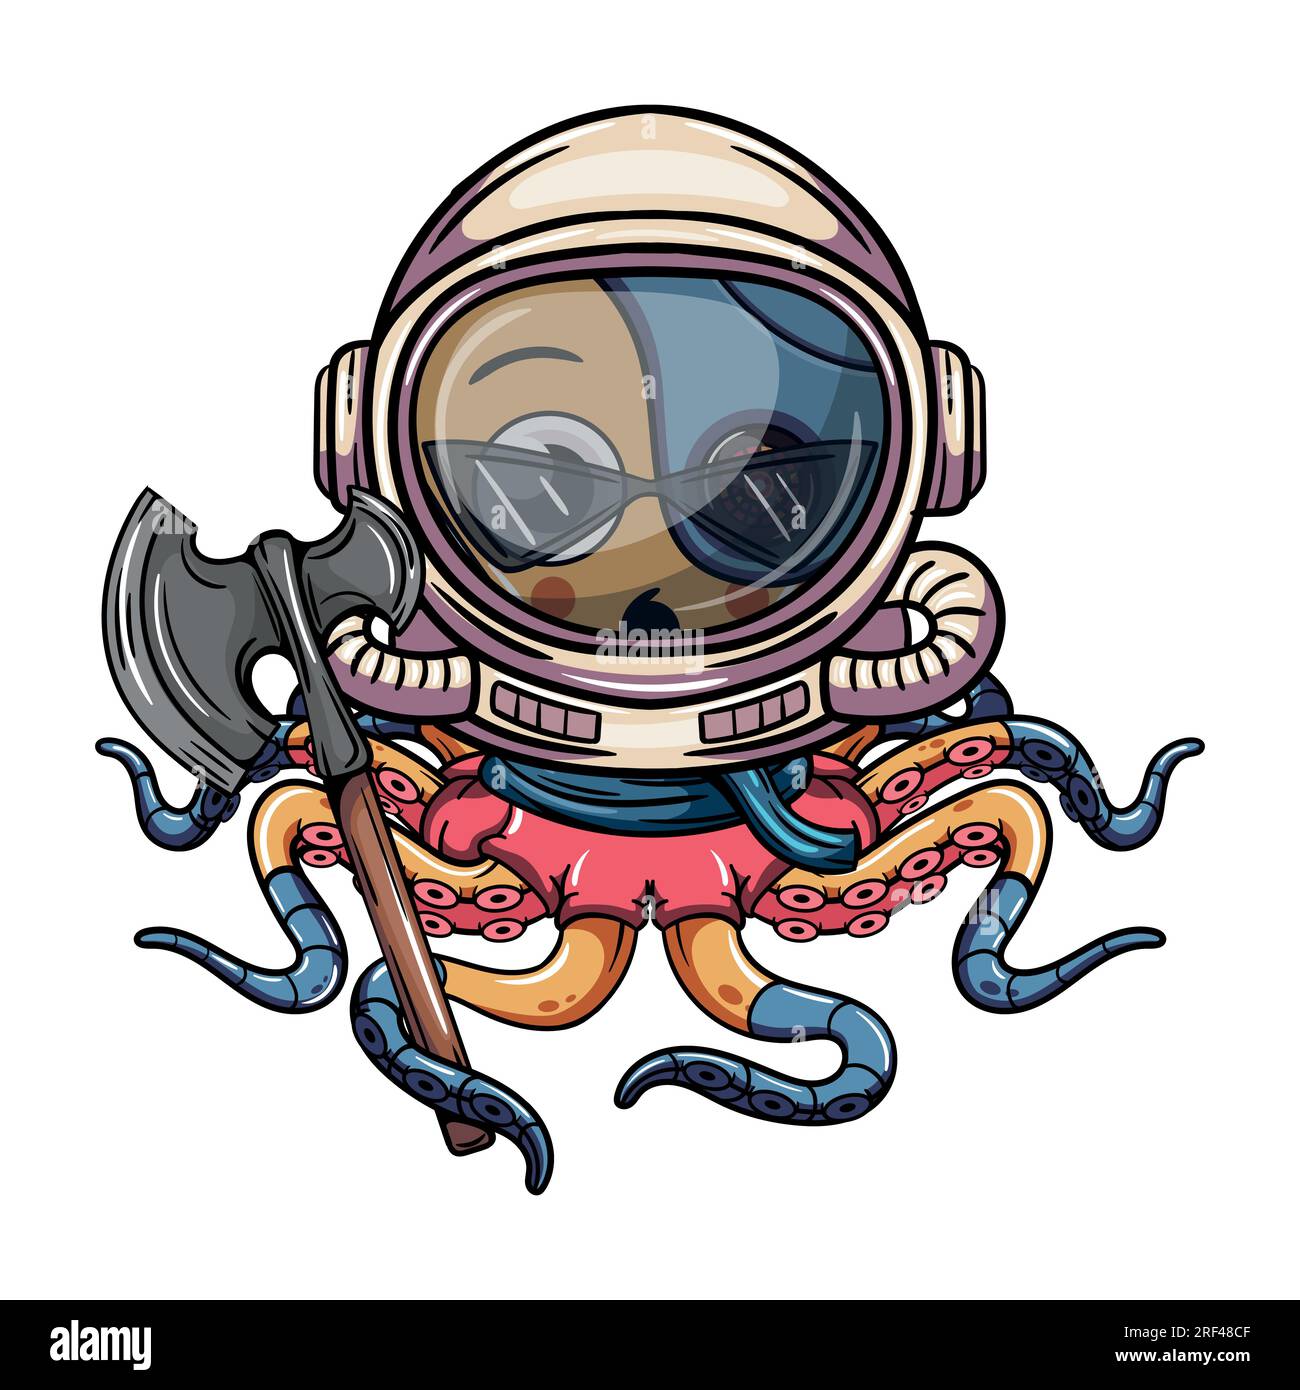 Cartoon cyborg yellow octopus character wearing astronaut space suit with war axe. Illustration for fantasy, science fiction and adventure comics Stock Vector